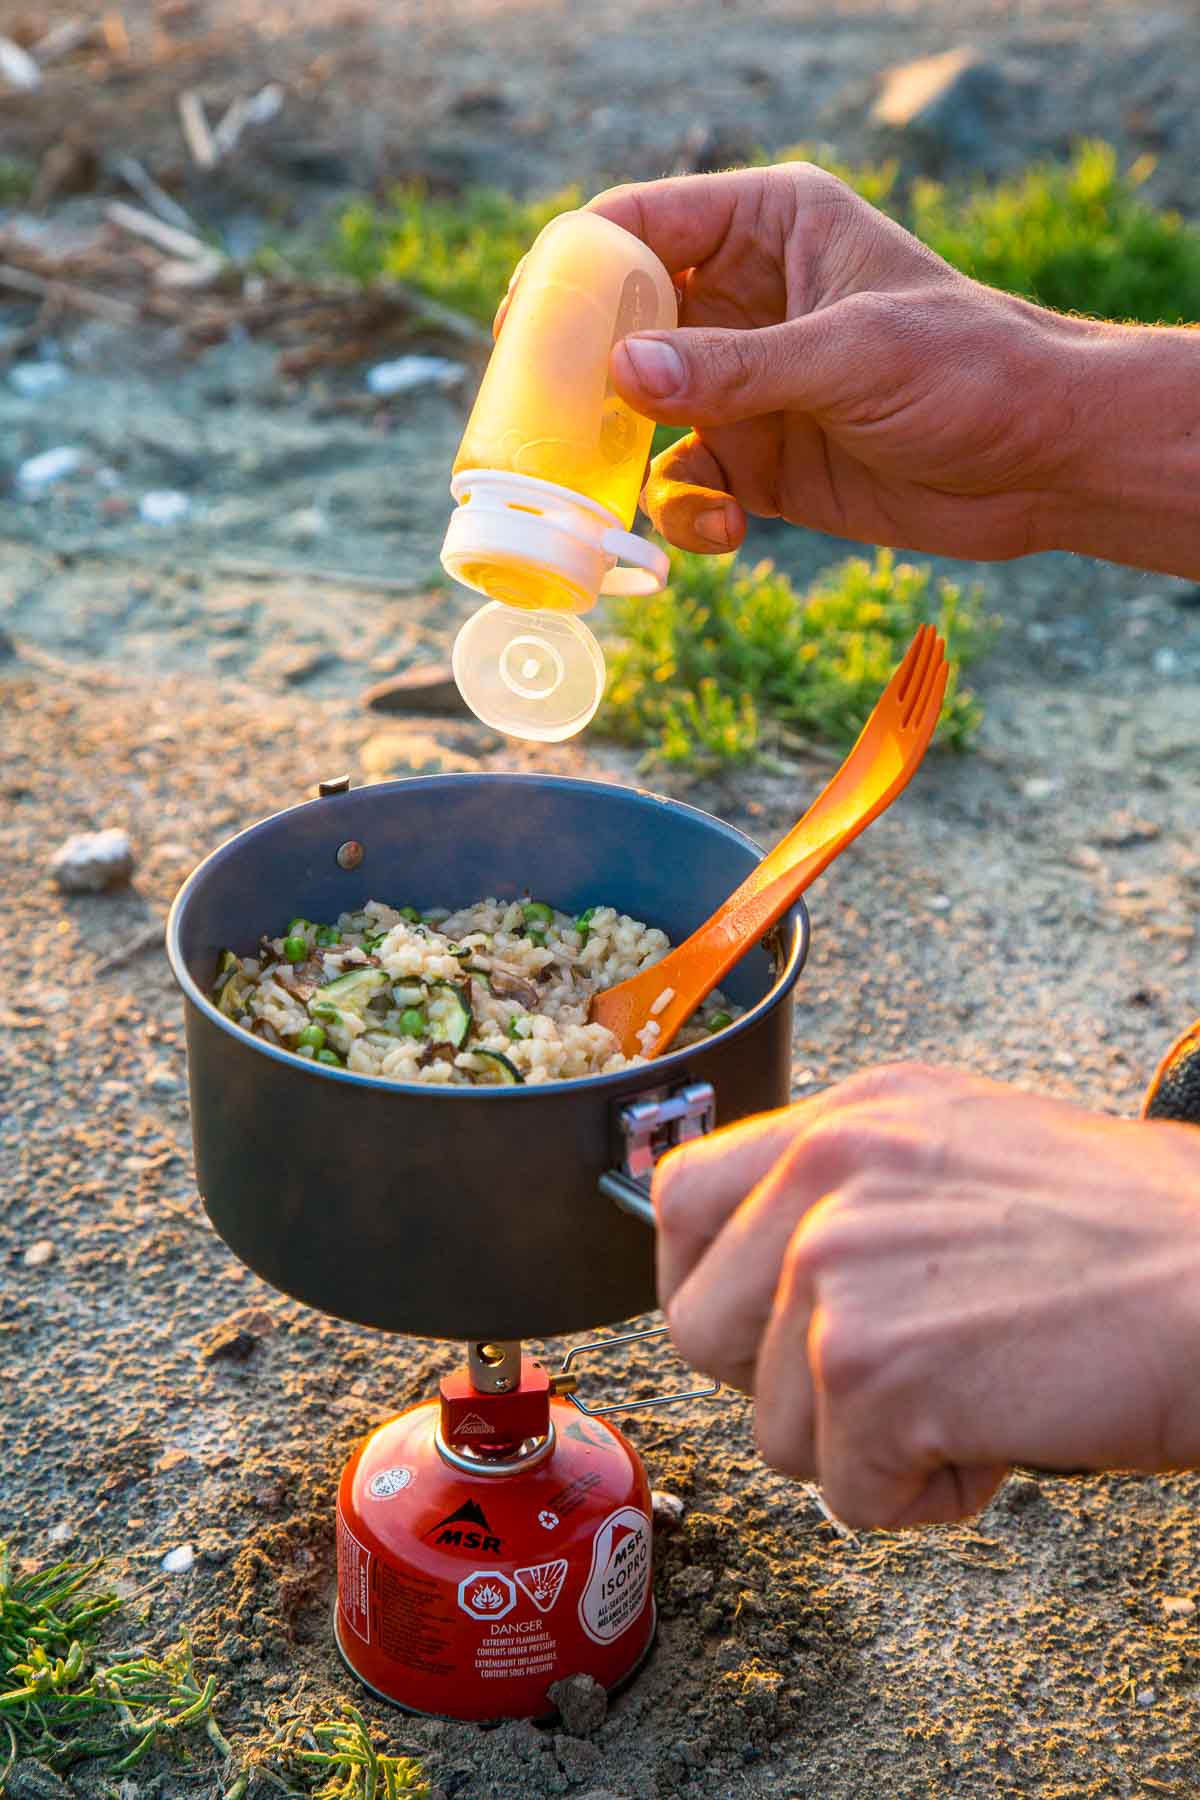 Michael adding olive oil from a squeeze bottle into a pot on a backpacking stove.